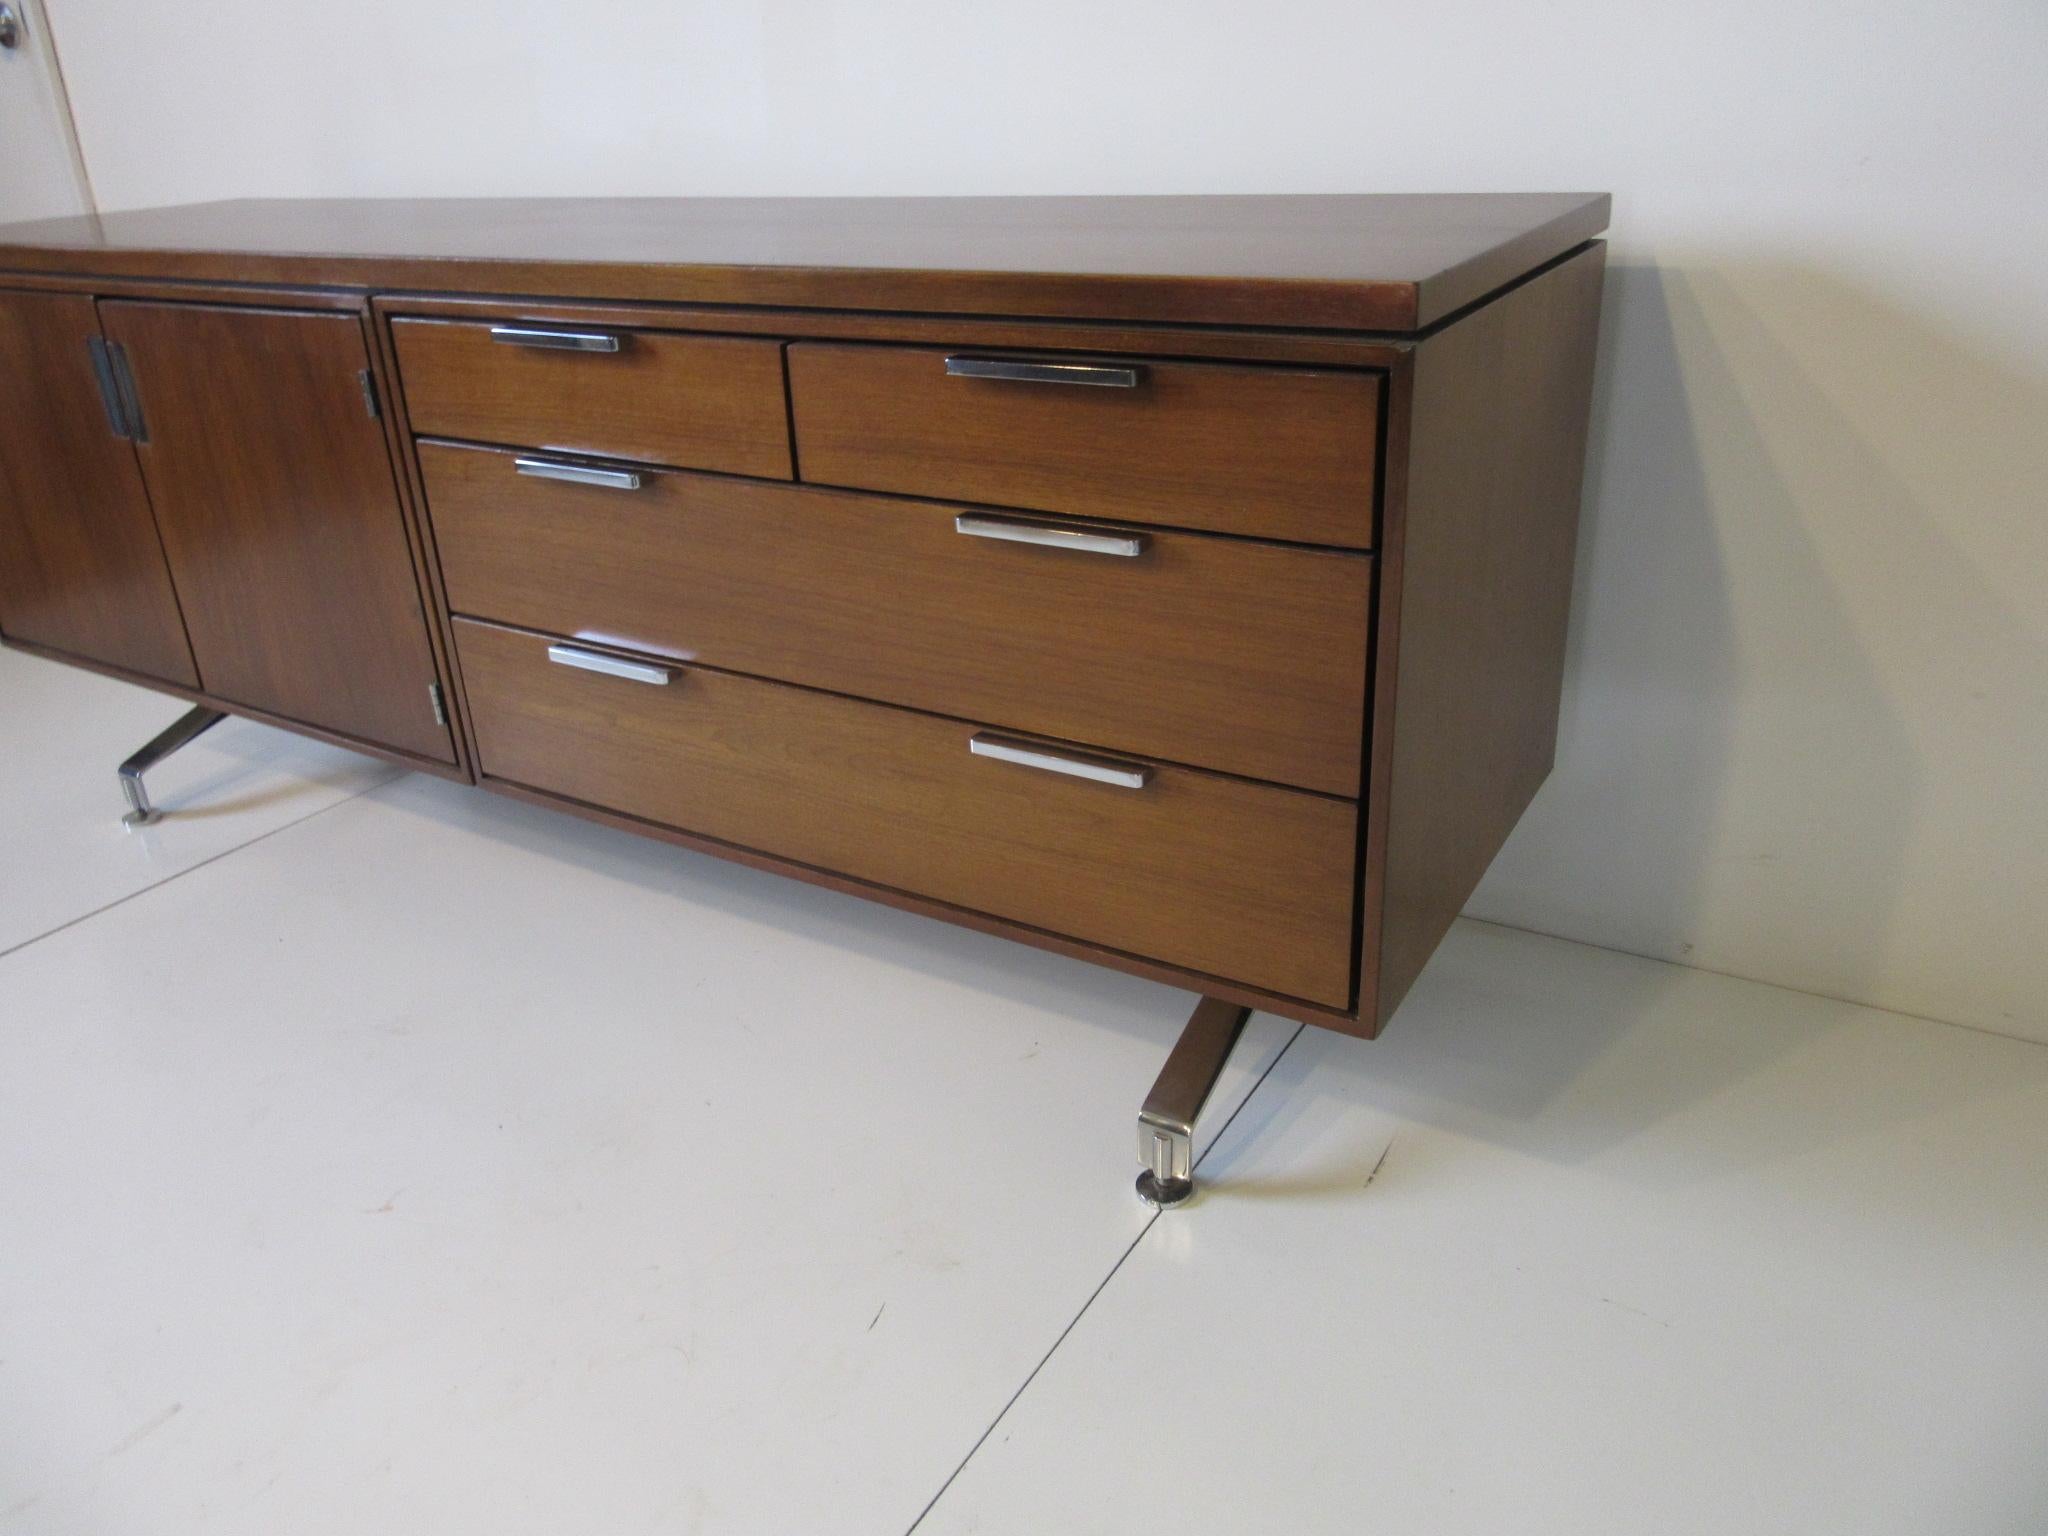 A very well constructed walnut credenza with chrome split legs and round foot pads complemented by long matching chrome pulls to the four drawers. The other side has two doors and a single shelve. The backside is finished in the same walnut so it